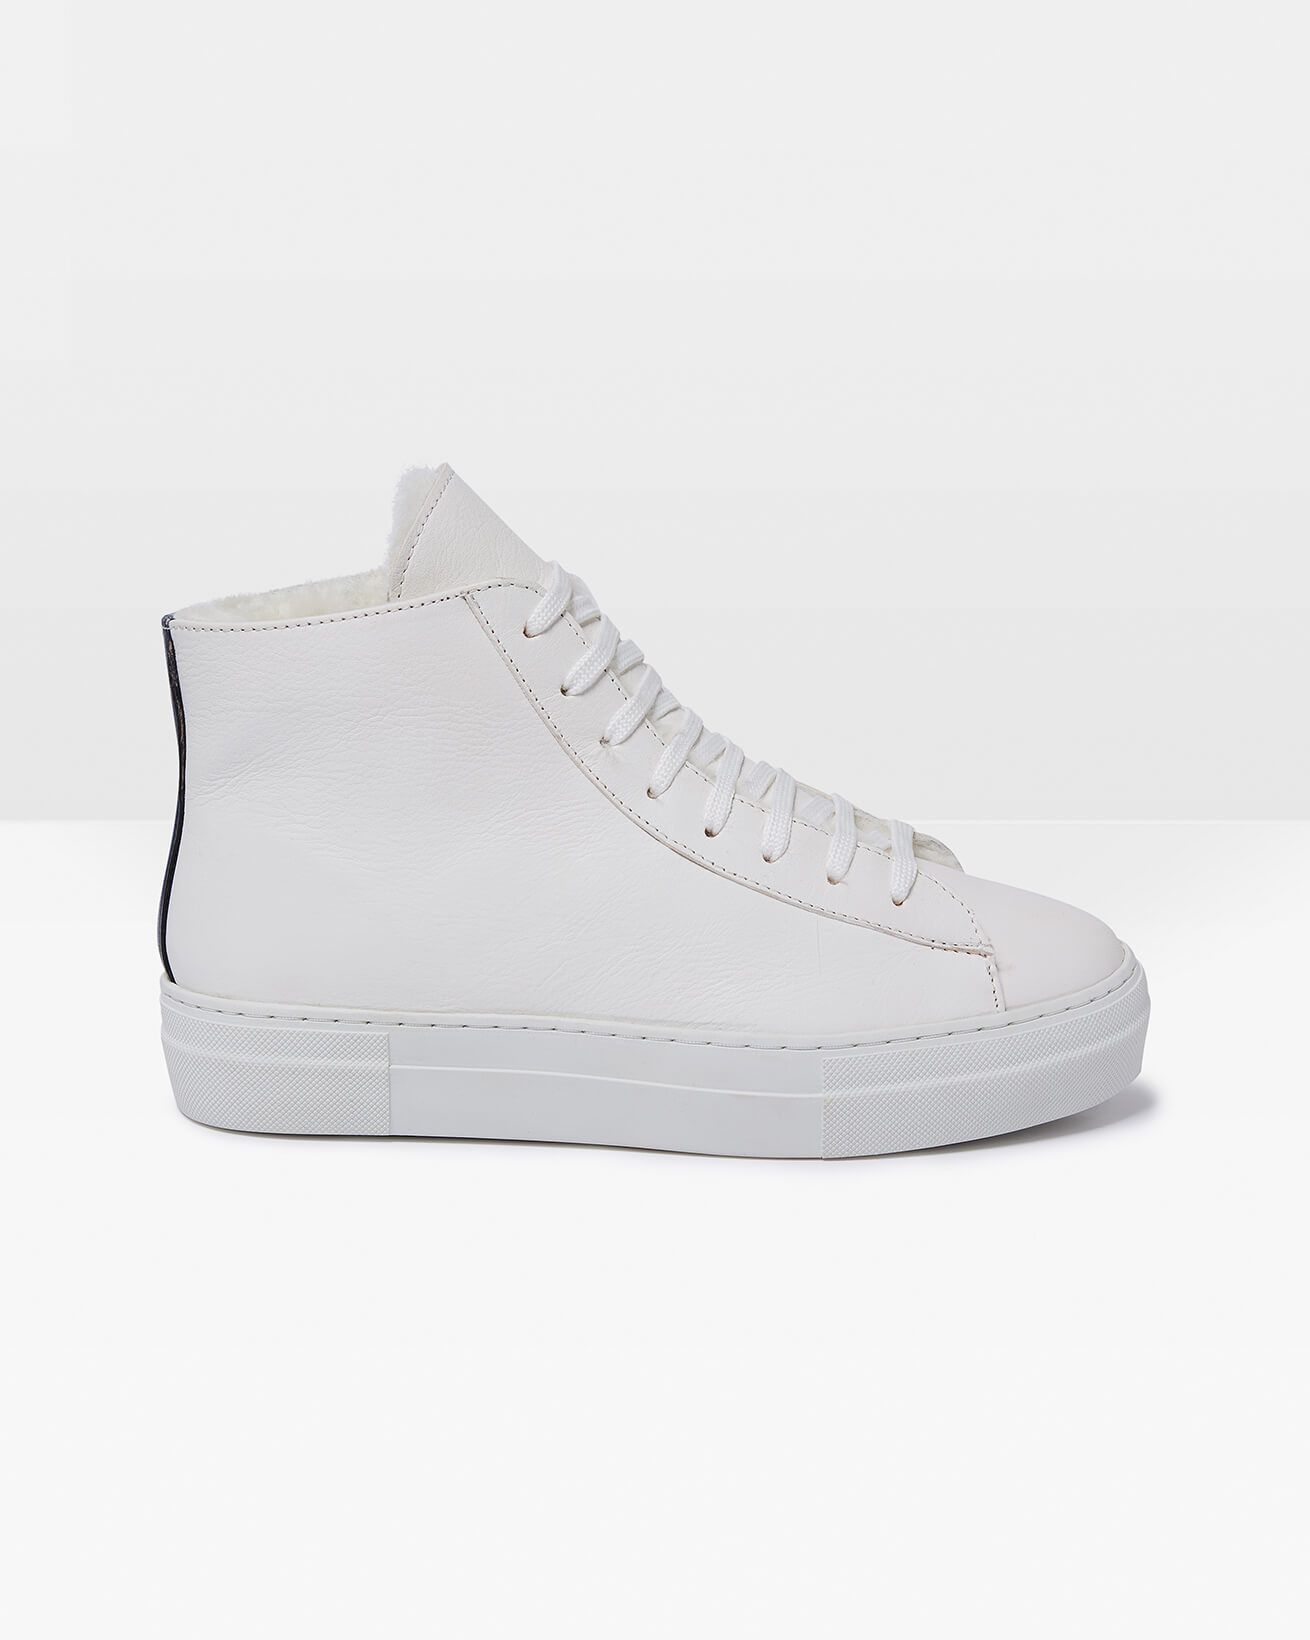 Shearling Lined High Top Sneakers